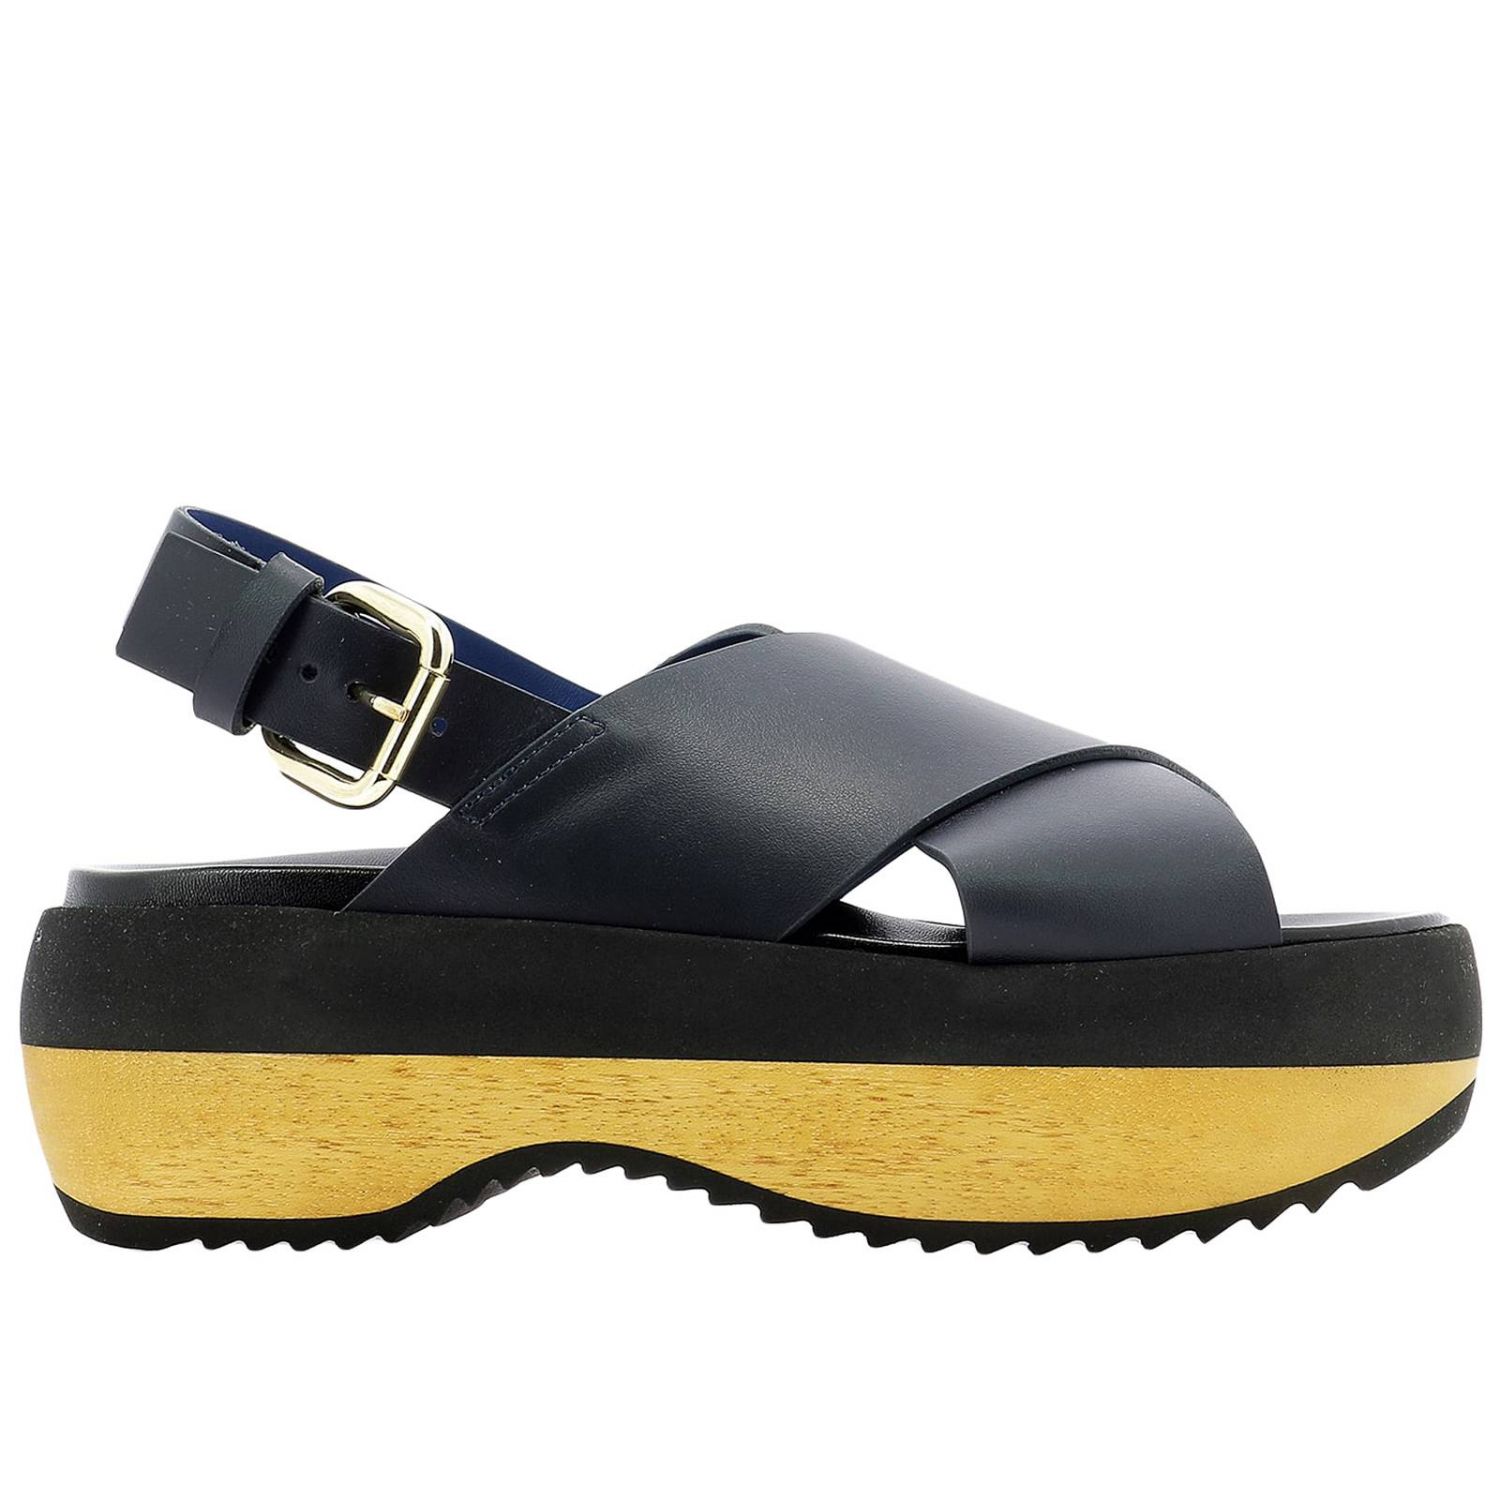 Marni Outlet: wedge shoes for woman - Navy | Marni wedge shoes ...